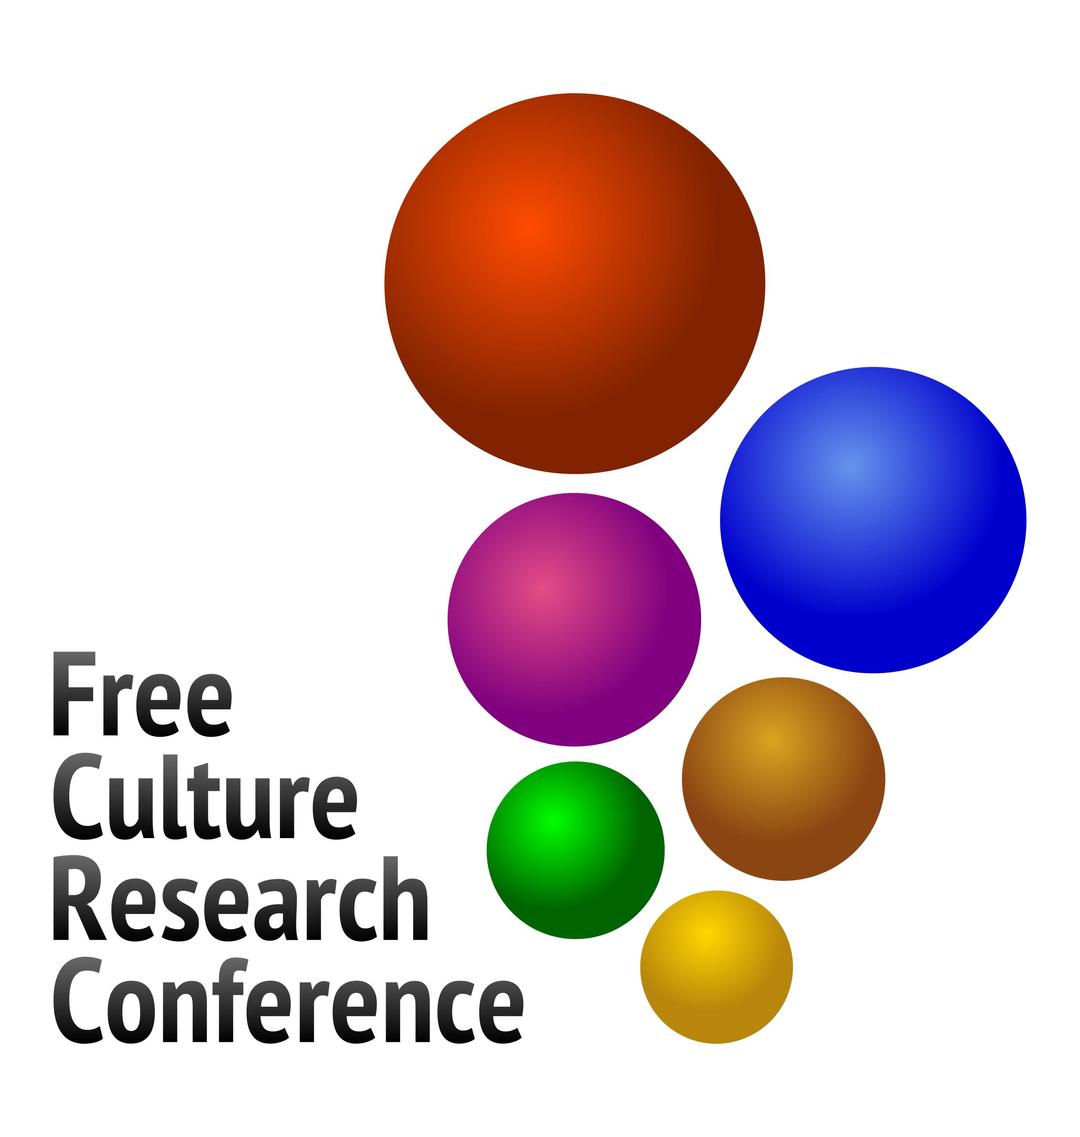 Free Culture Research Conference logo V2 png transparent